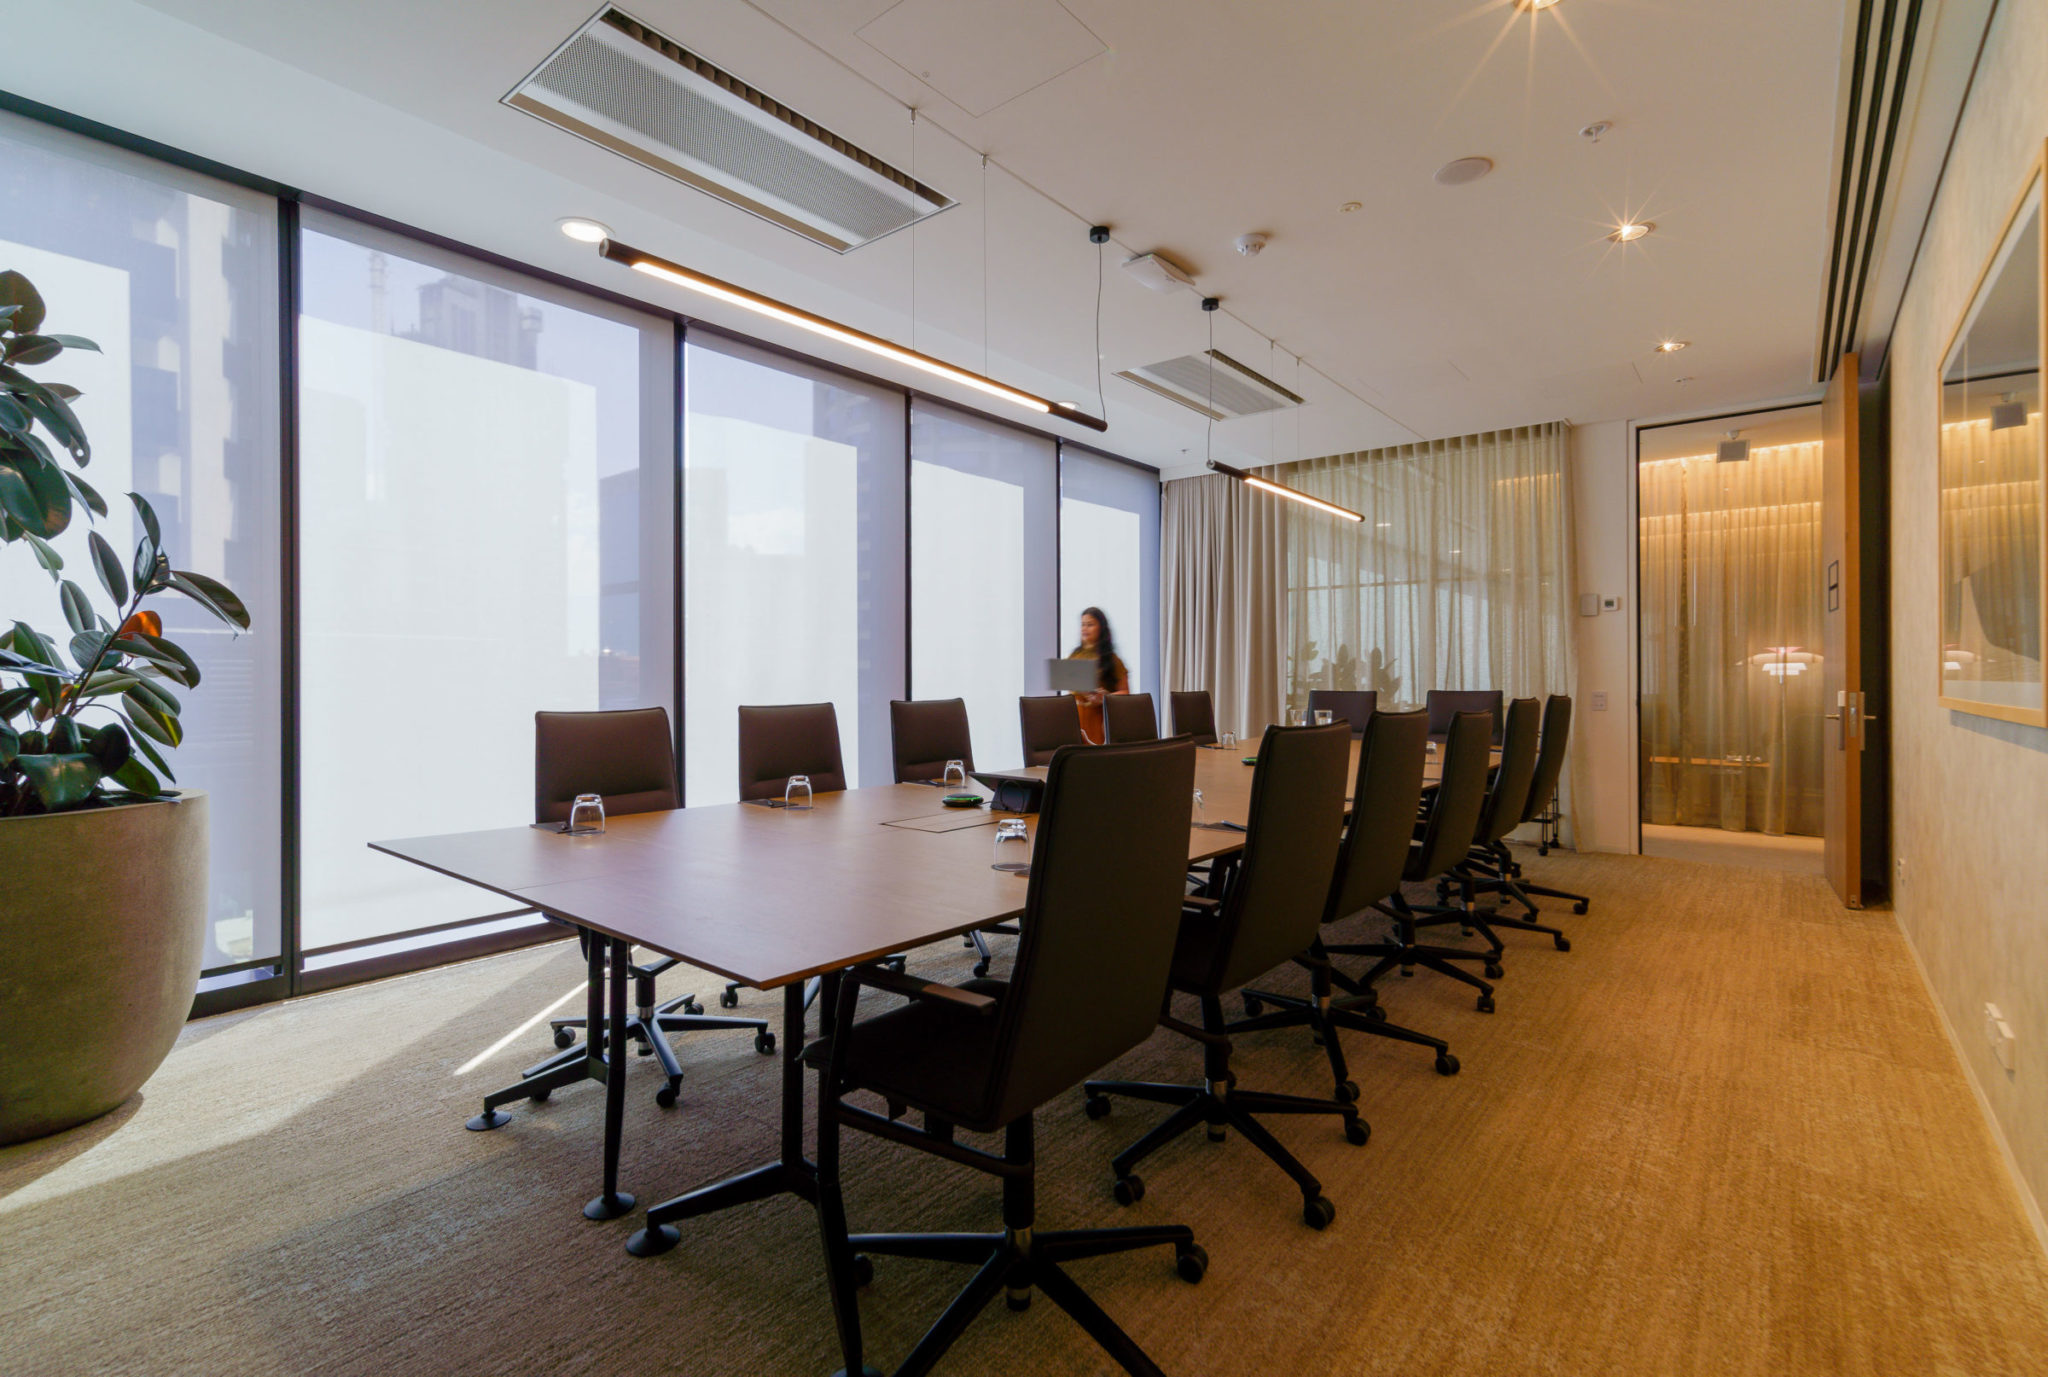  Sydney Meeting Rooms & Events Spaces For Hire Find your ideal space for your next meeting or event in Sydney.